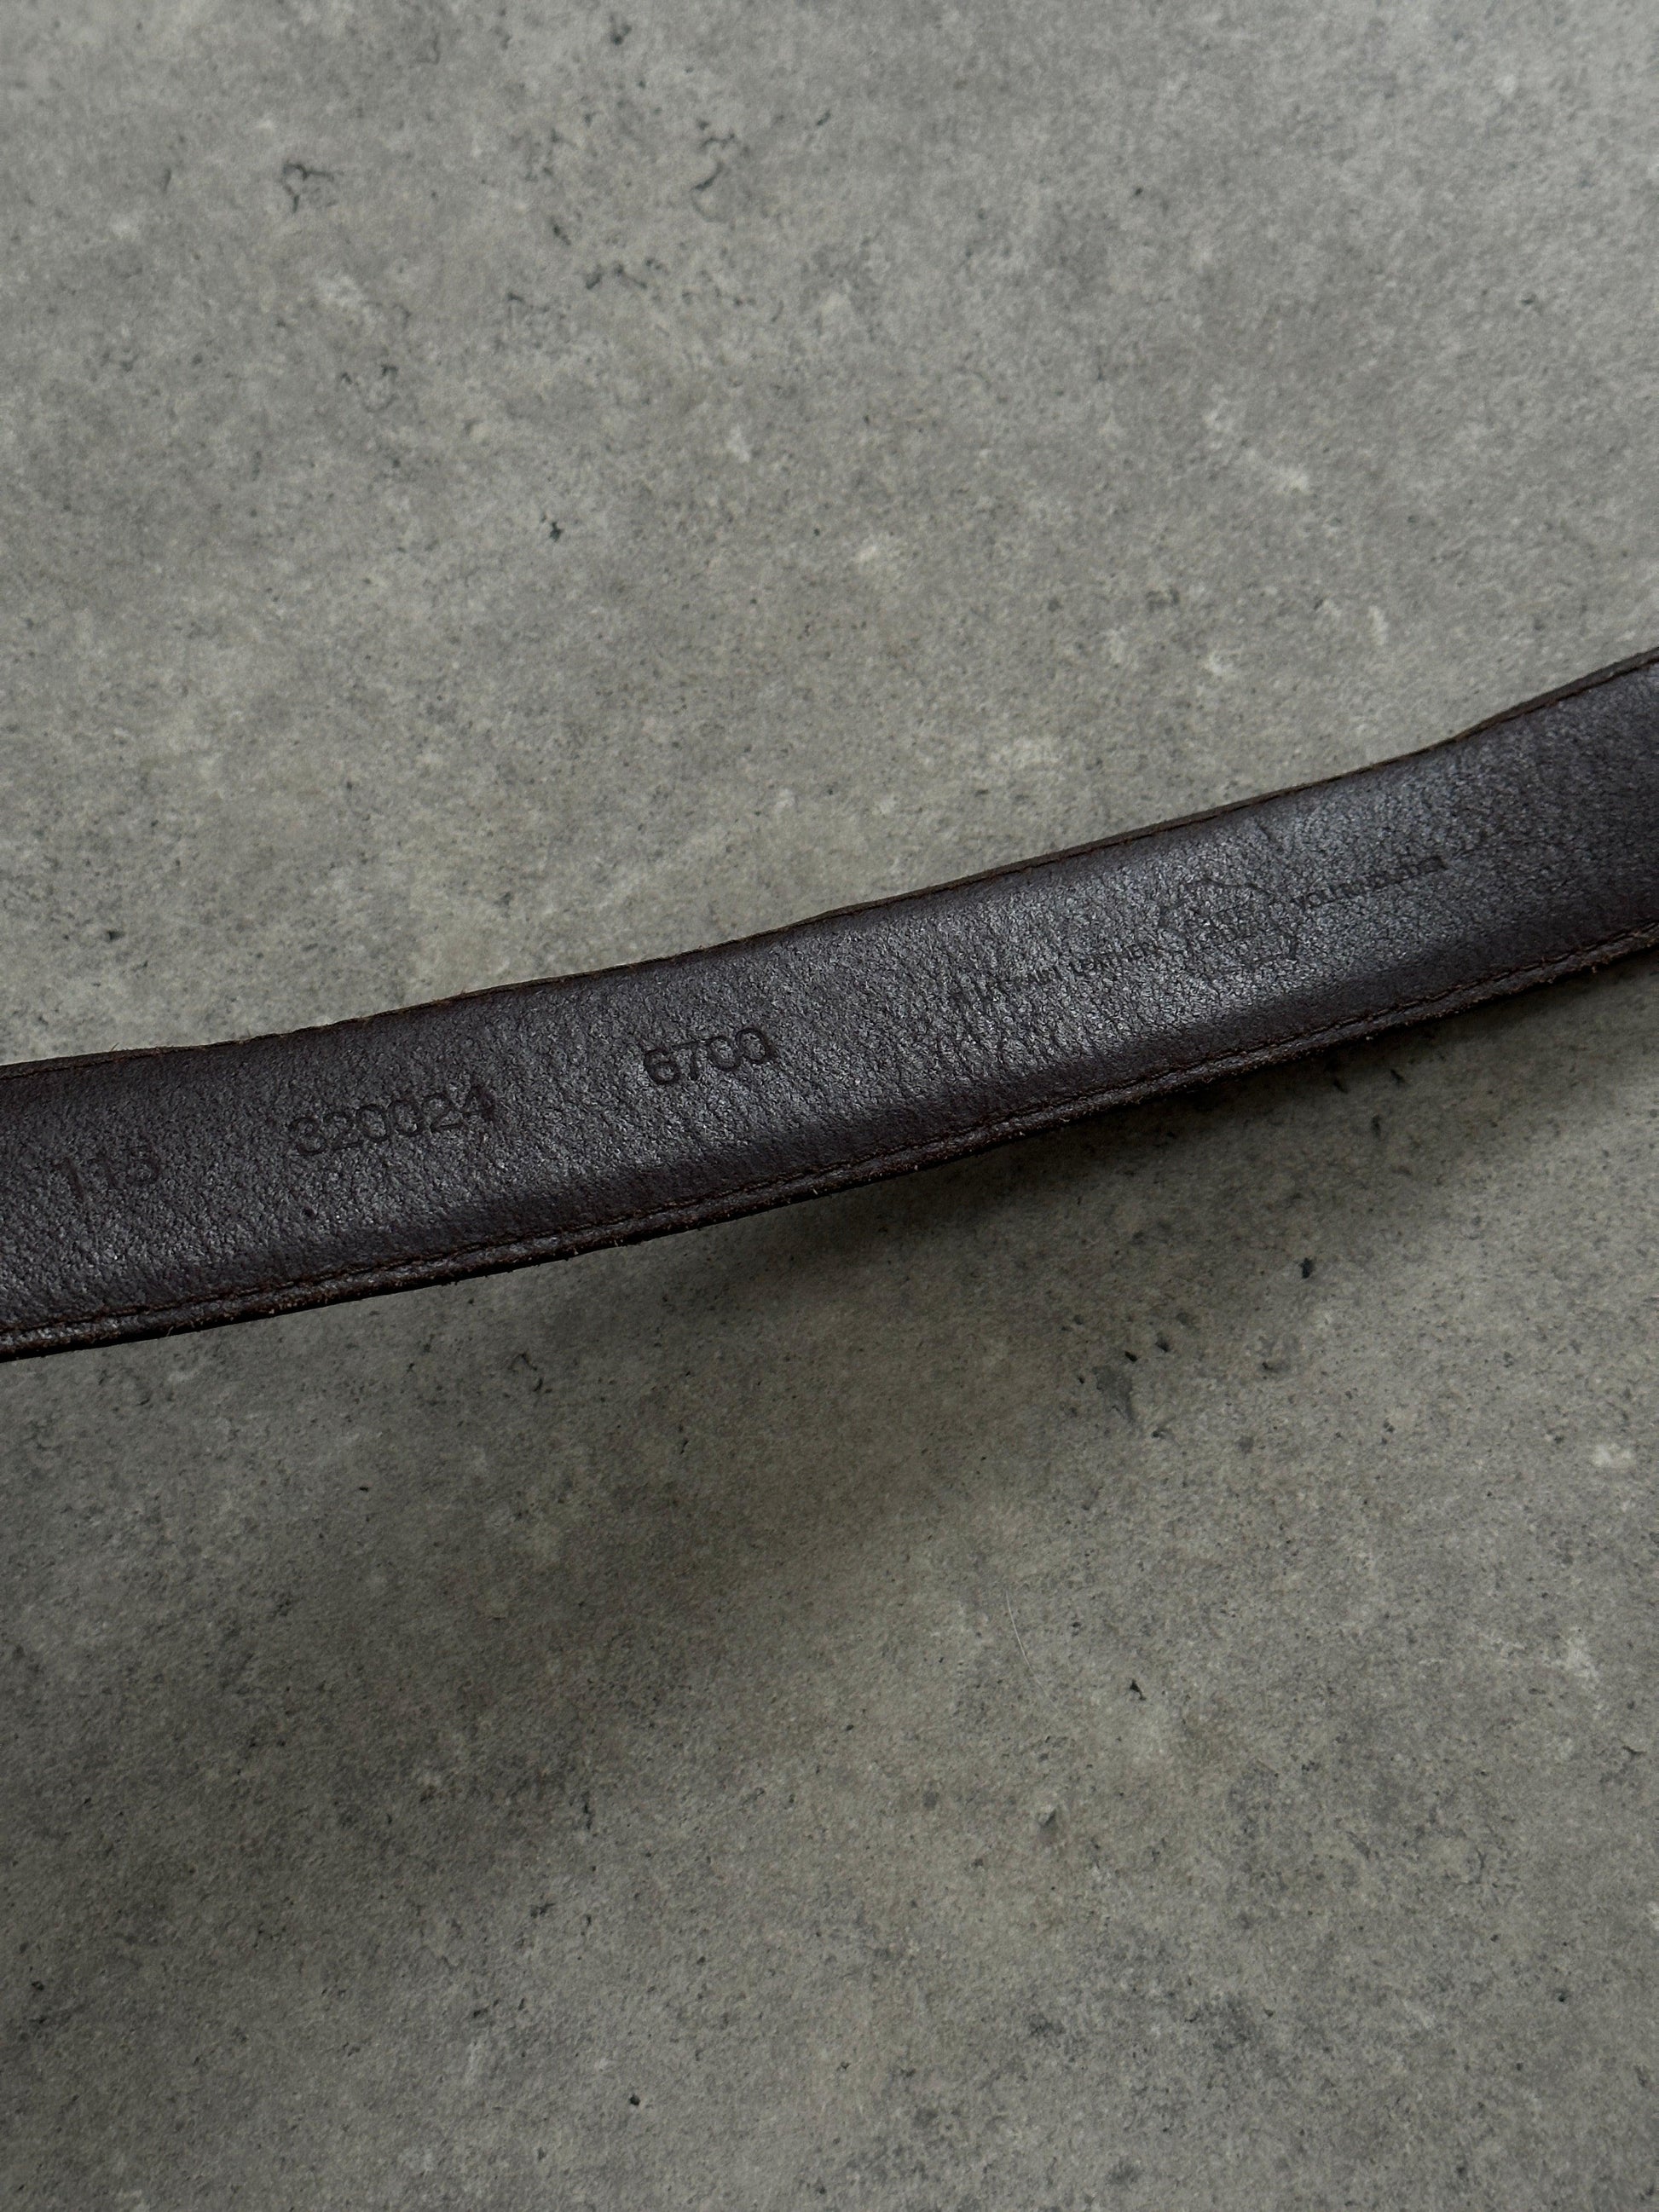 Vintage Distressed Leather Belt W37-41 - Known Source